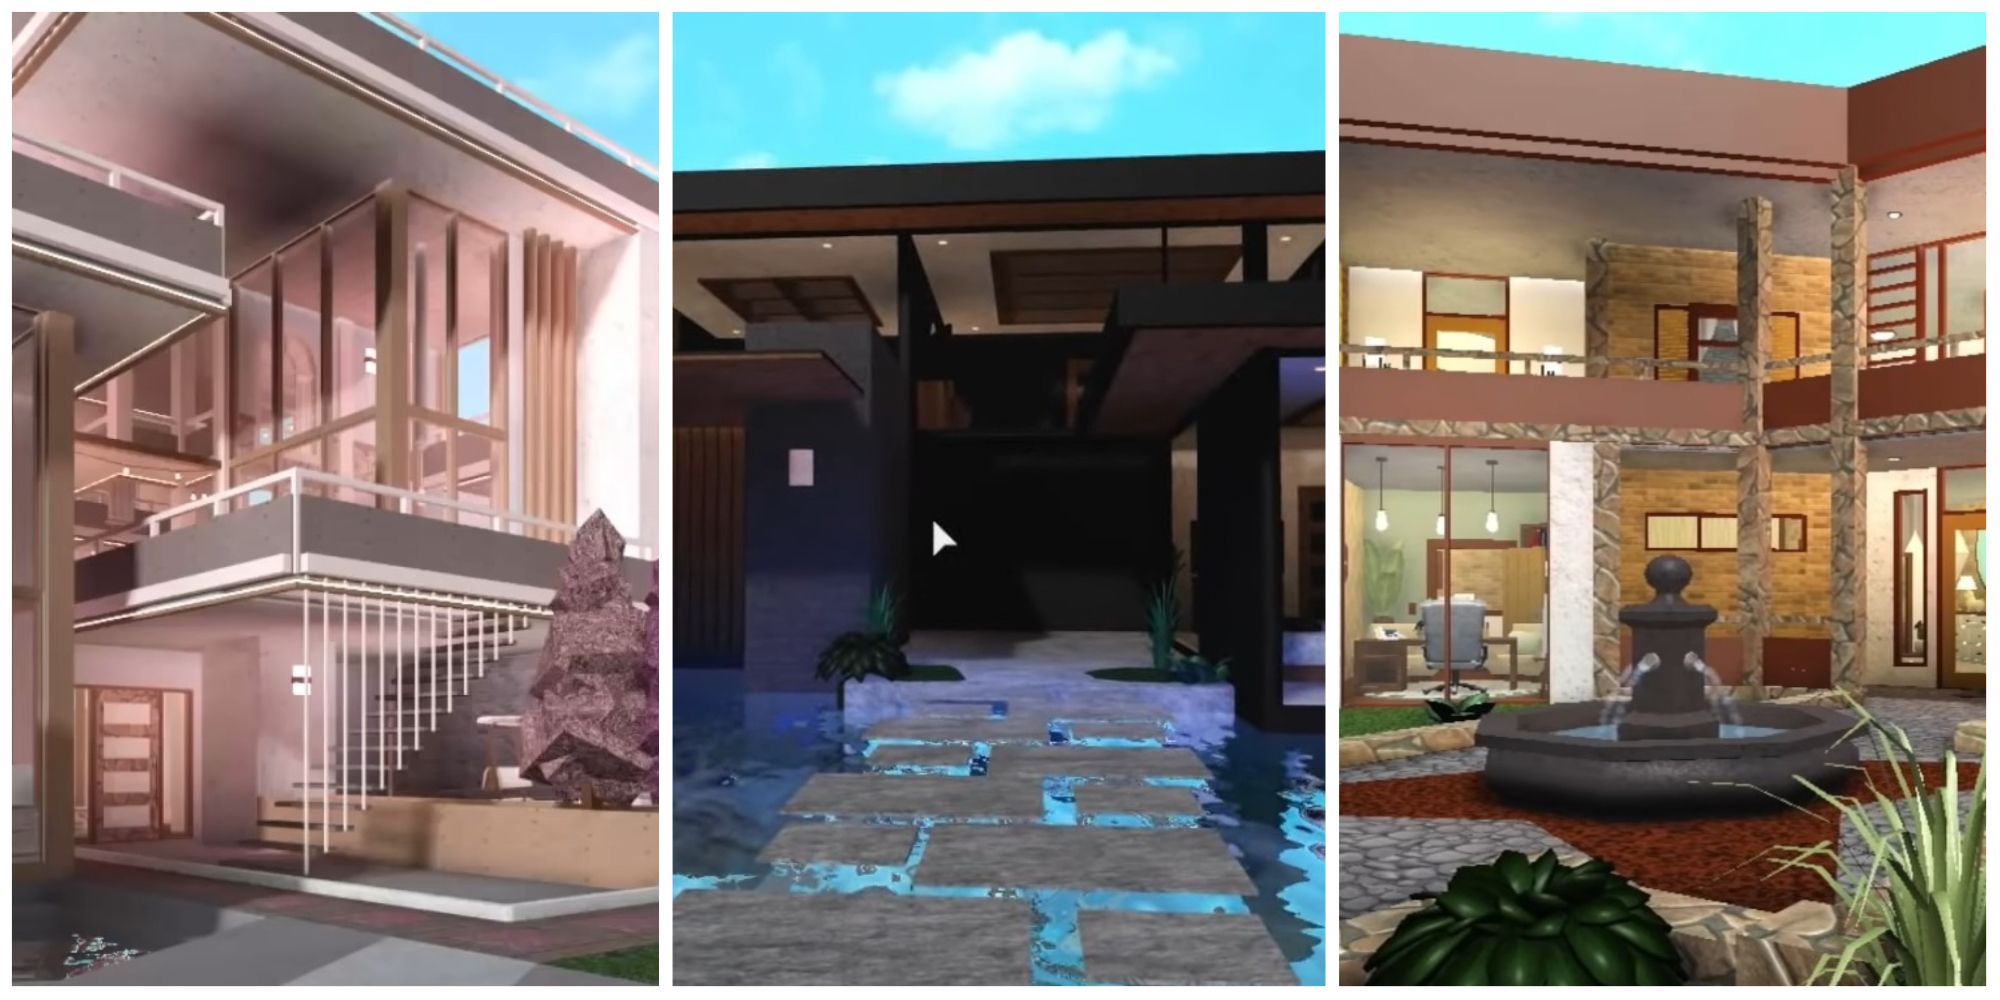 Best Bloxburg House Layout Ideas: Your Guide to Building the Dream